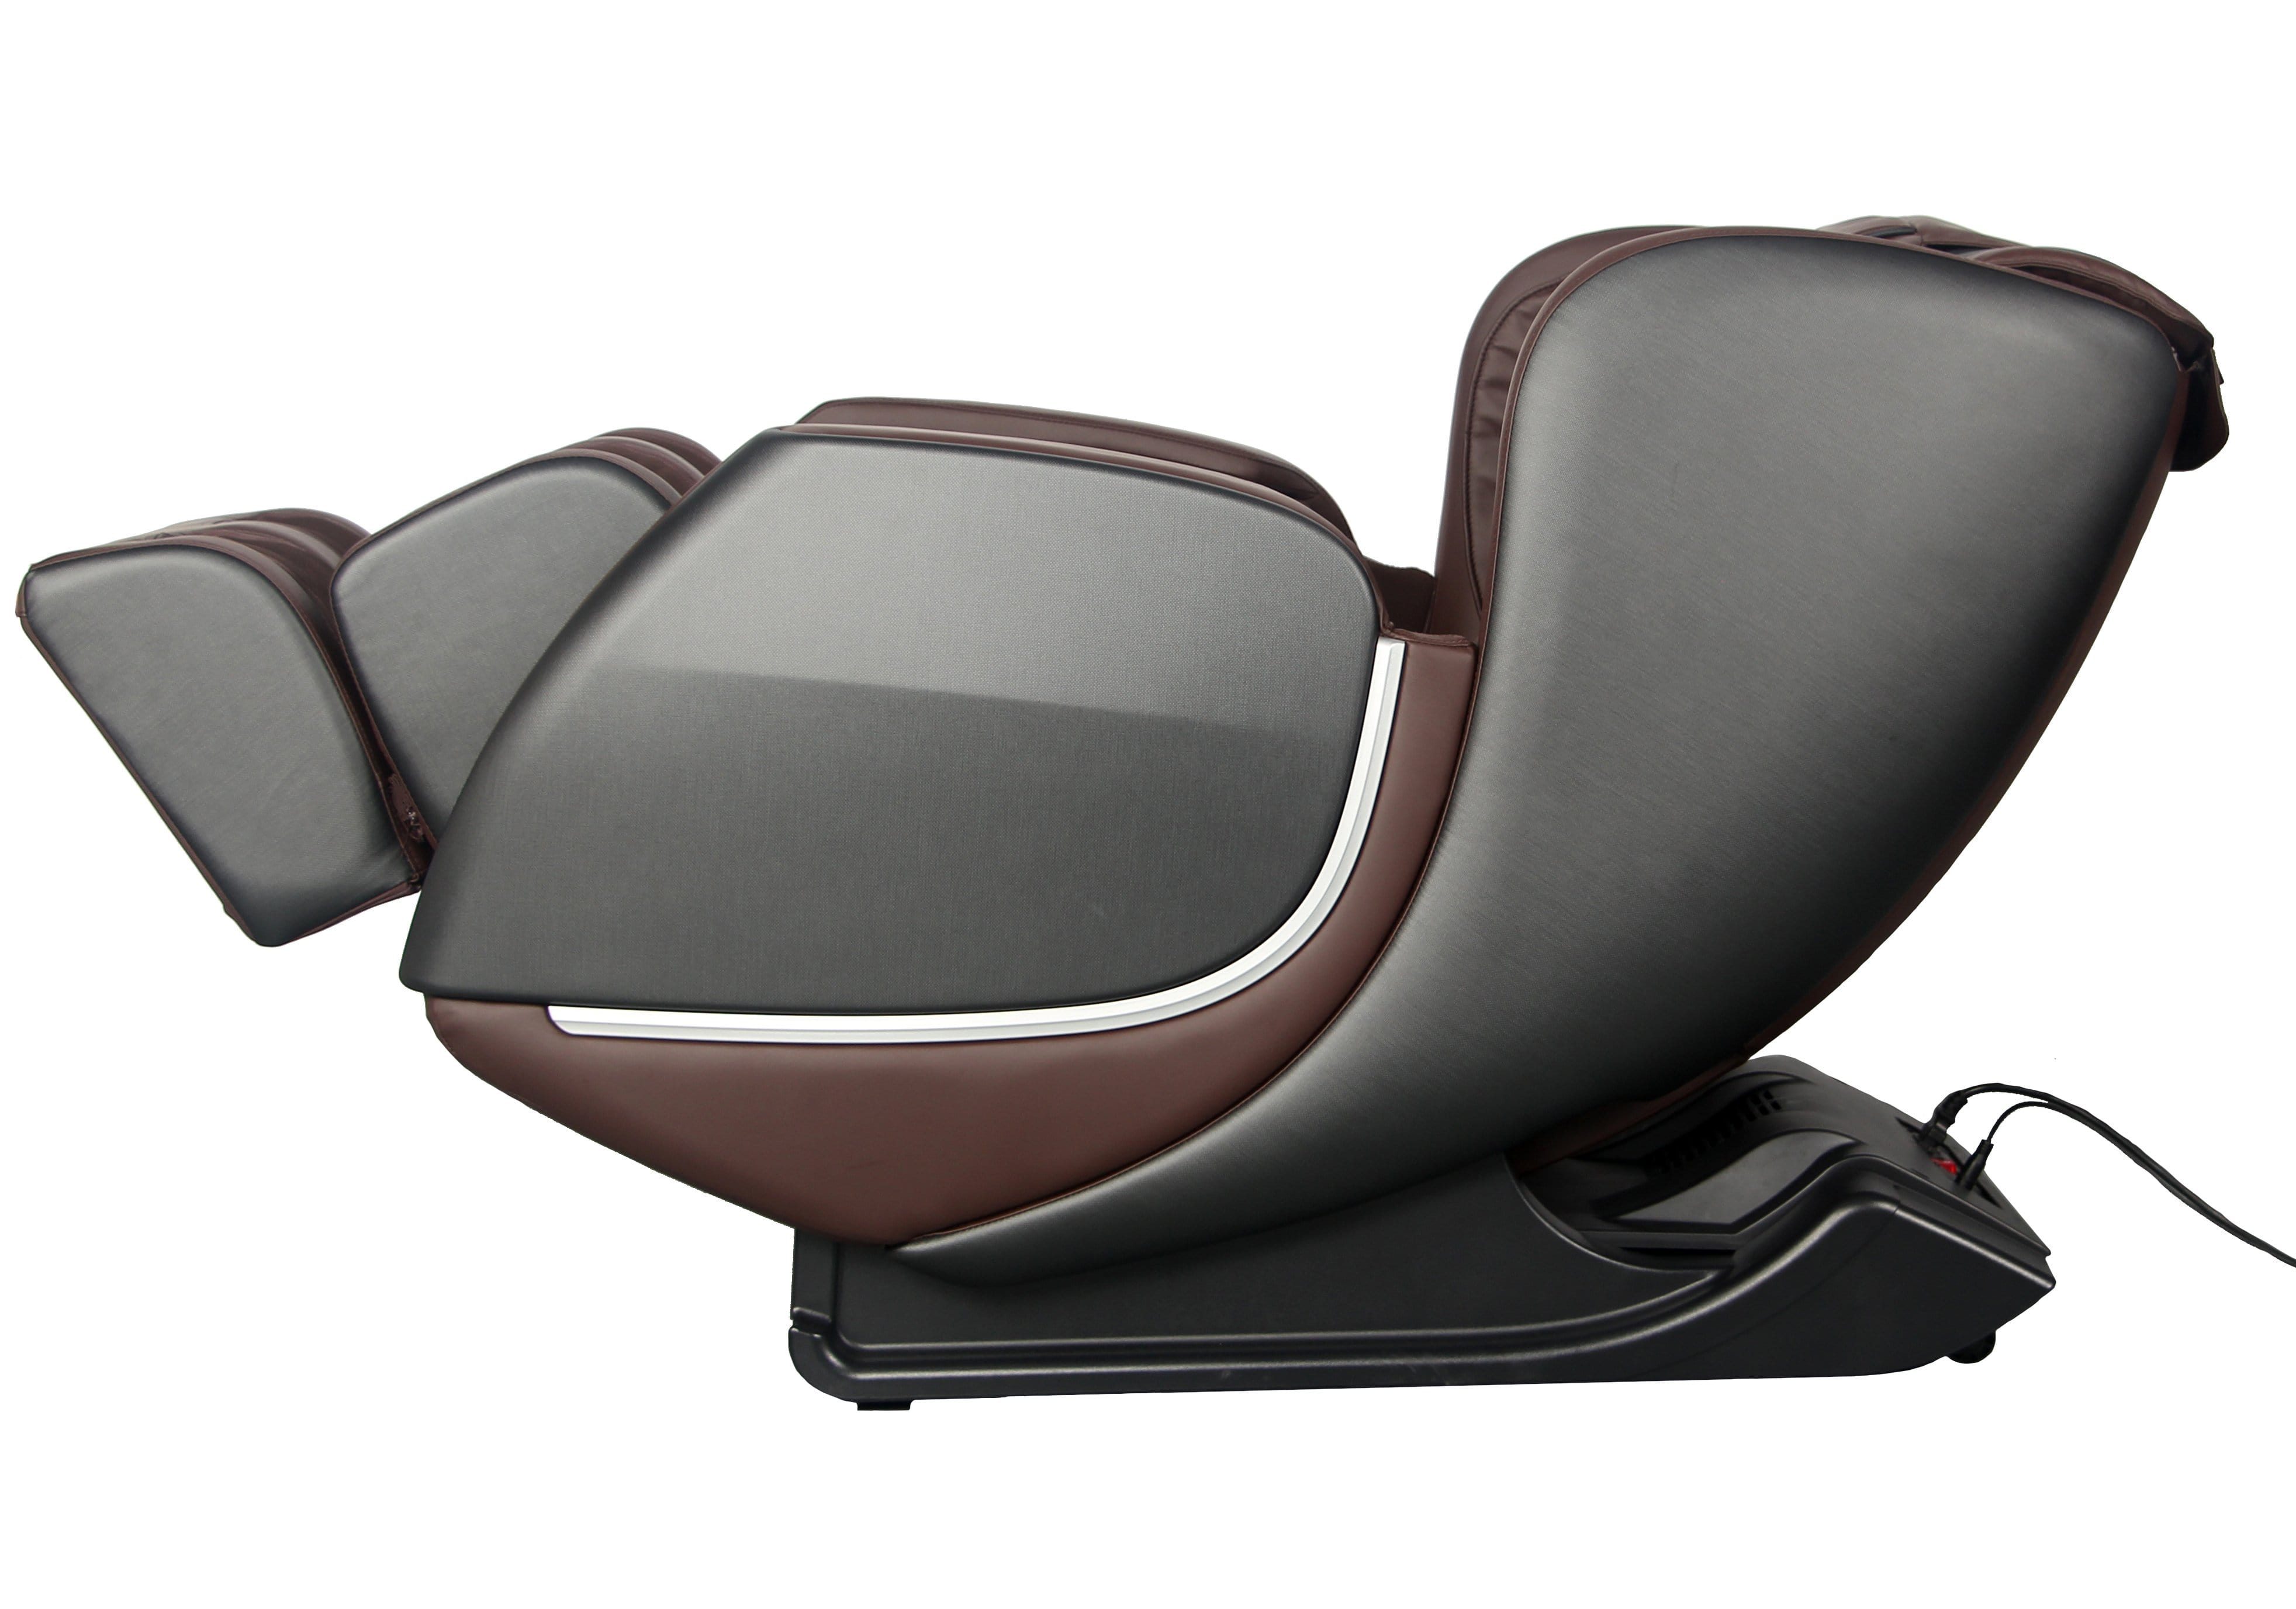 Kyota Massage Chair Black / Free Curbside Delivery / Free 4 Year Limited Warranty Kyota Kofuko E330 Massage Chair 13150014